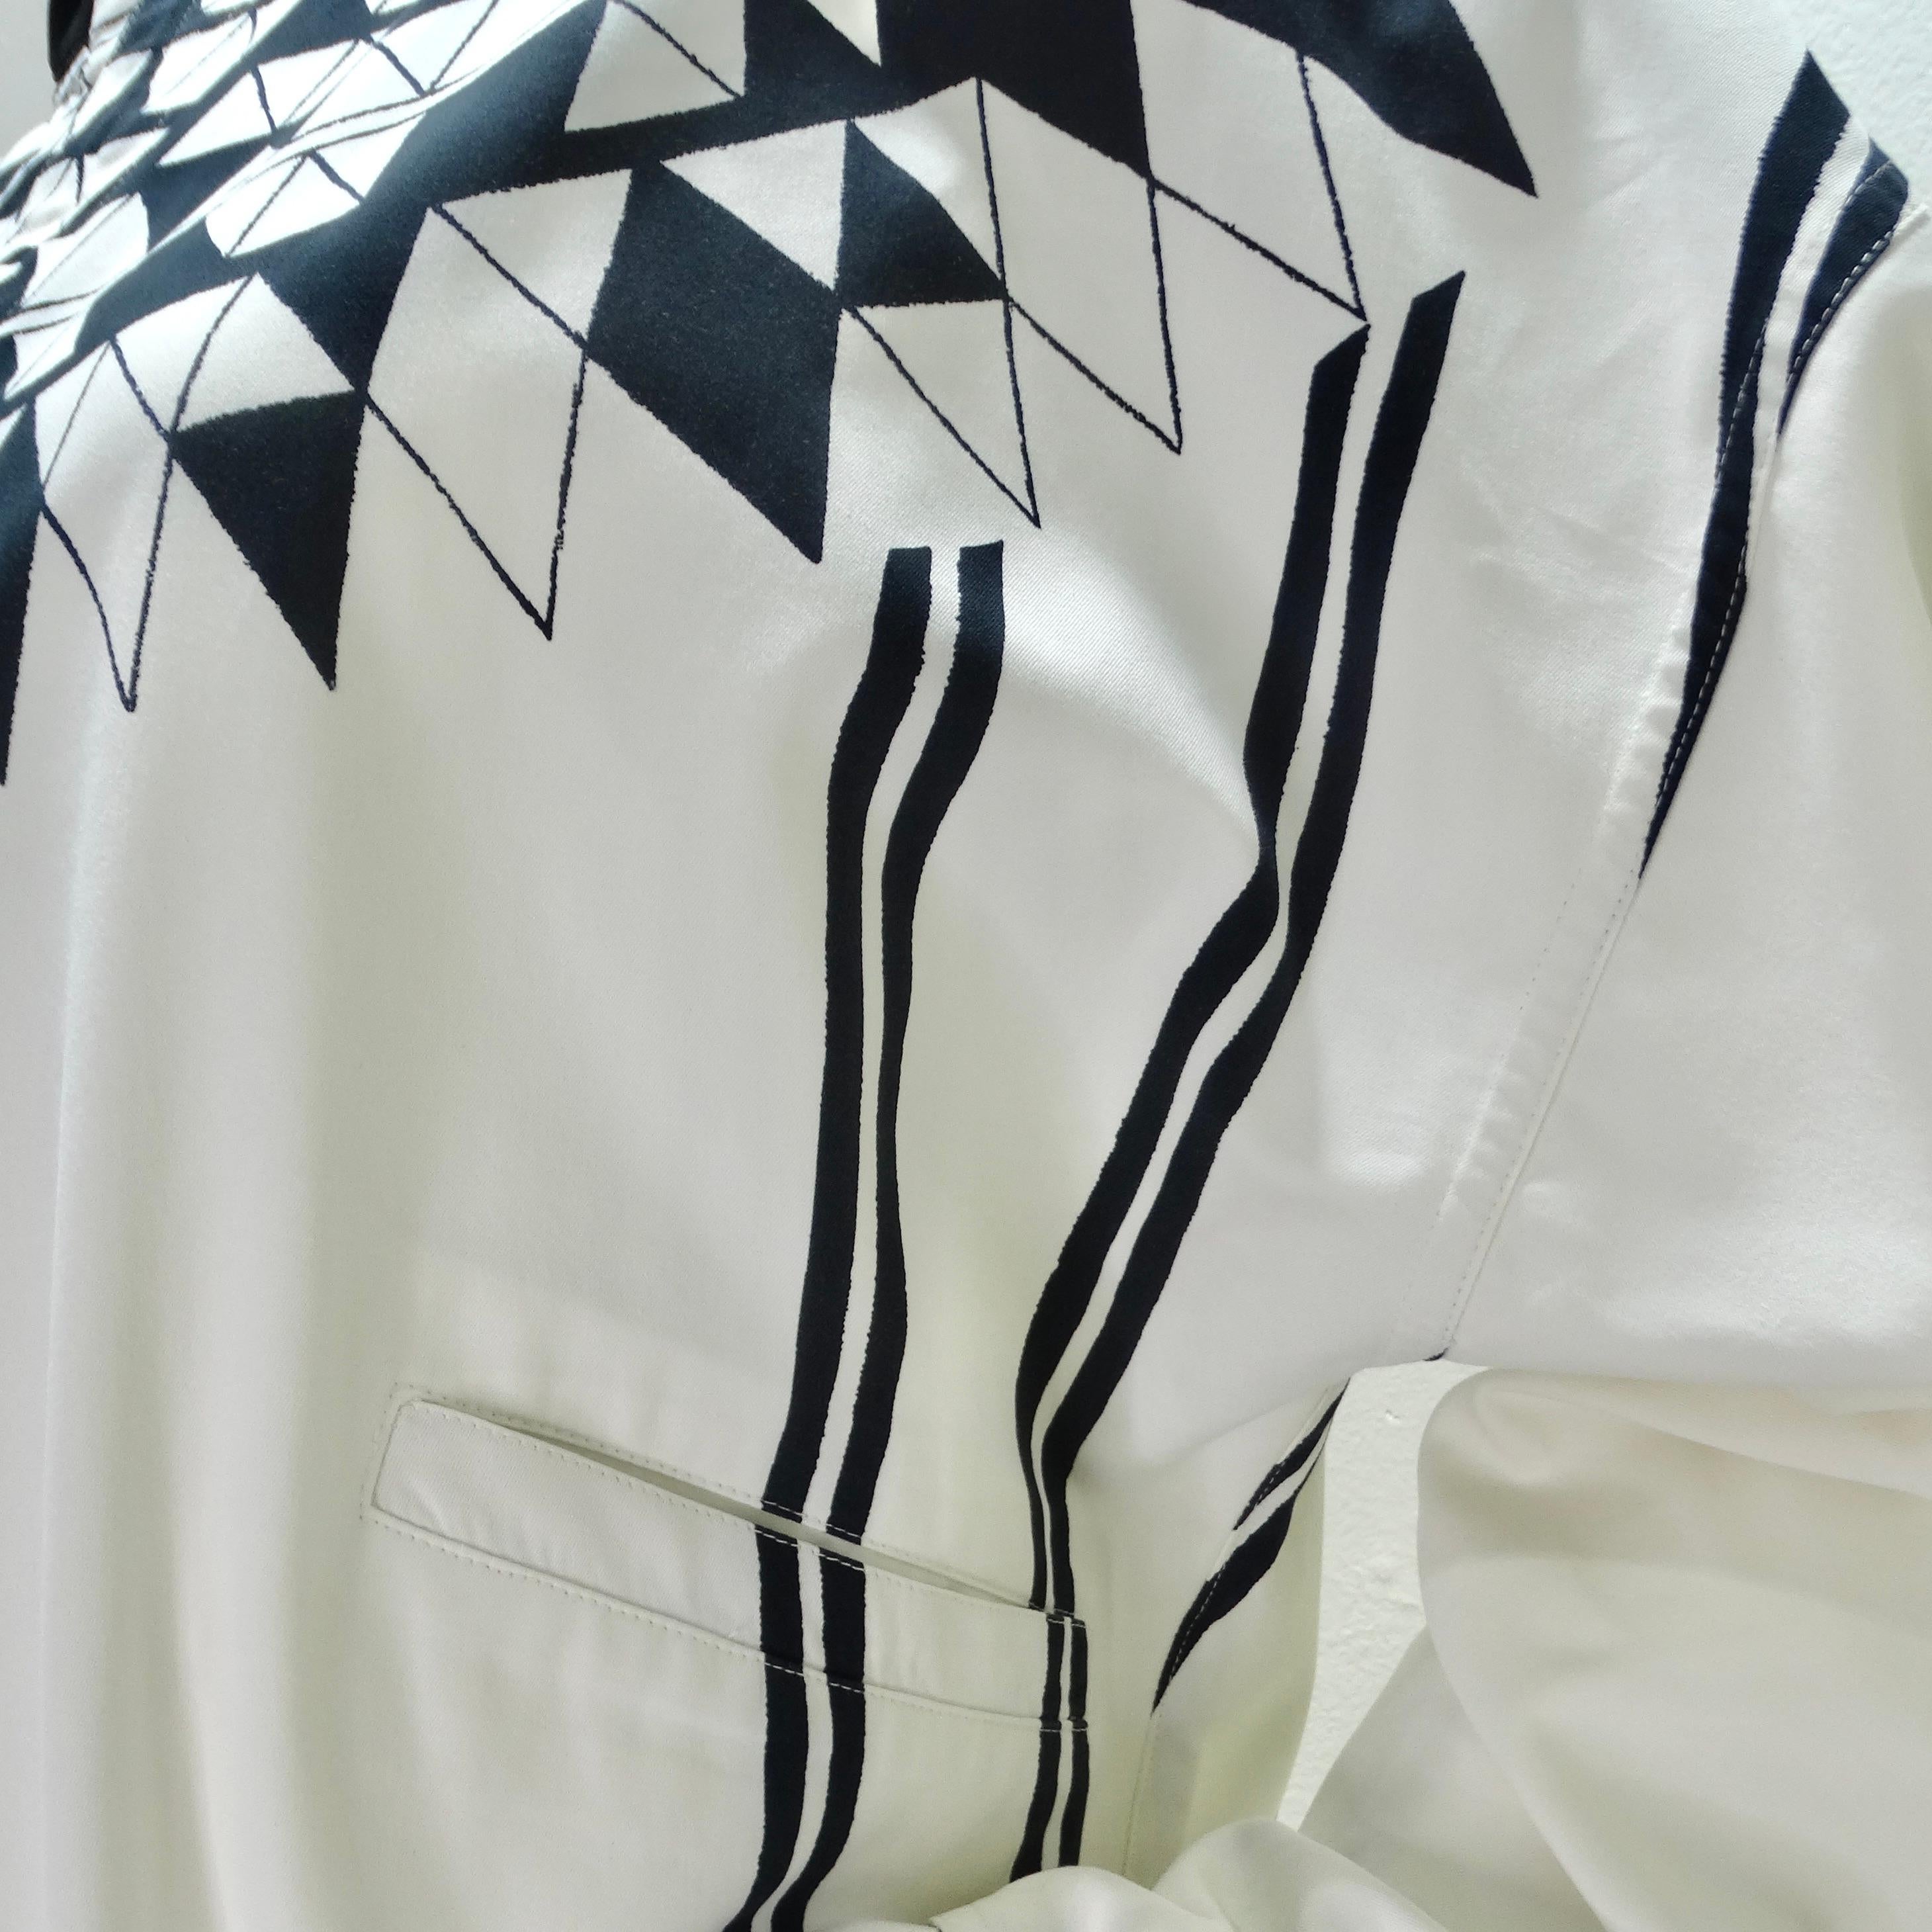 Gianni Versace 1980s Black & White Bomber Jacket In Excellent Condition For Sale In Scottsdale, AZ